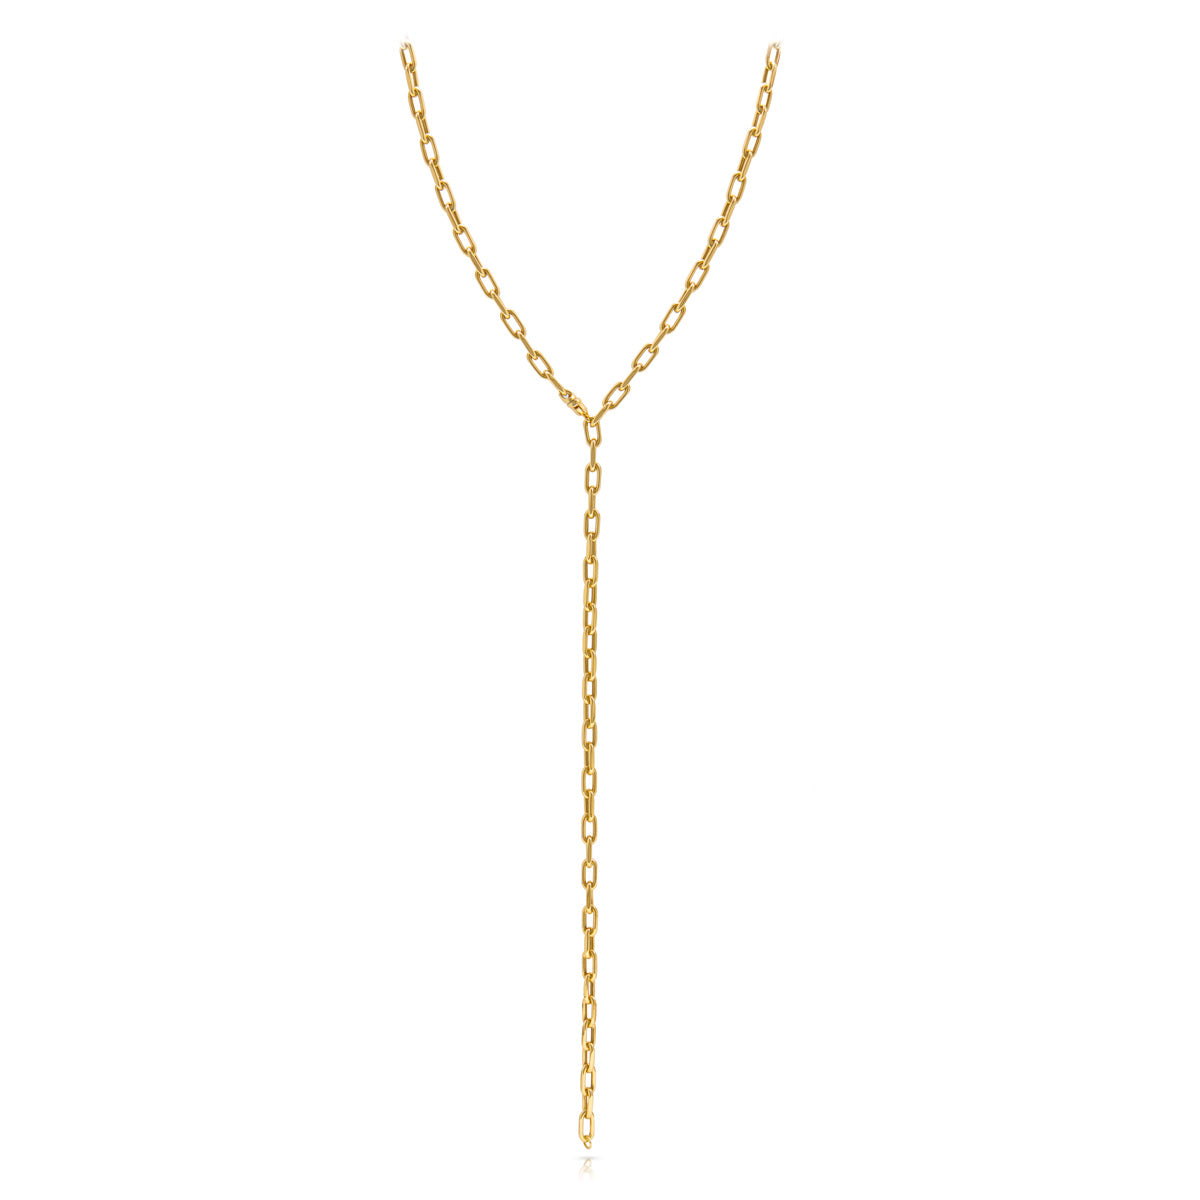 14KT Yellow Gold 30" Chain Link Lillian Necklace